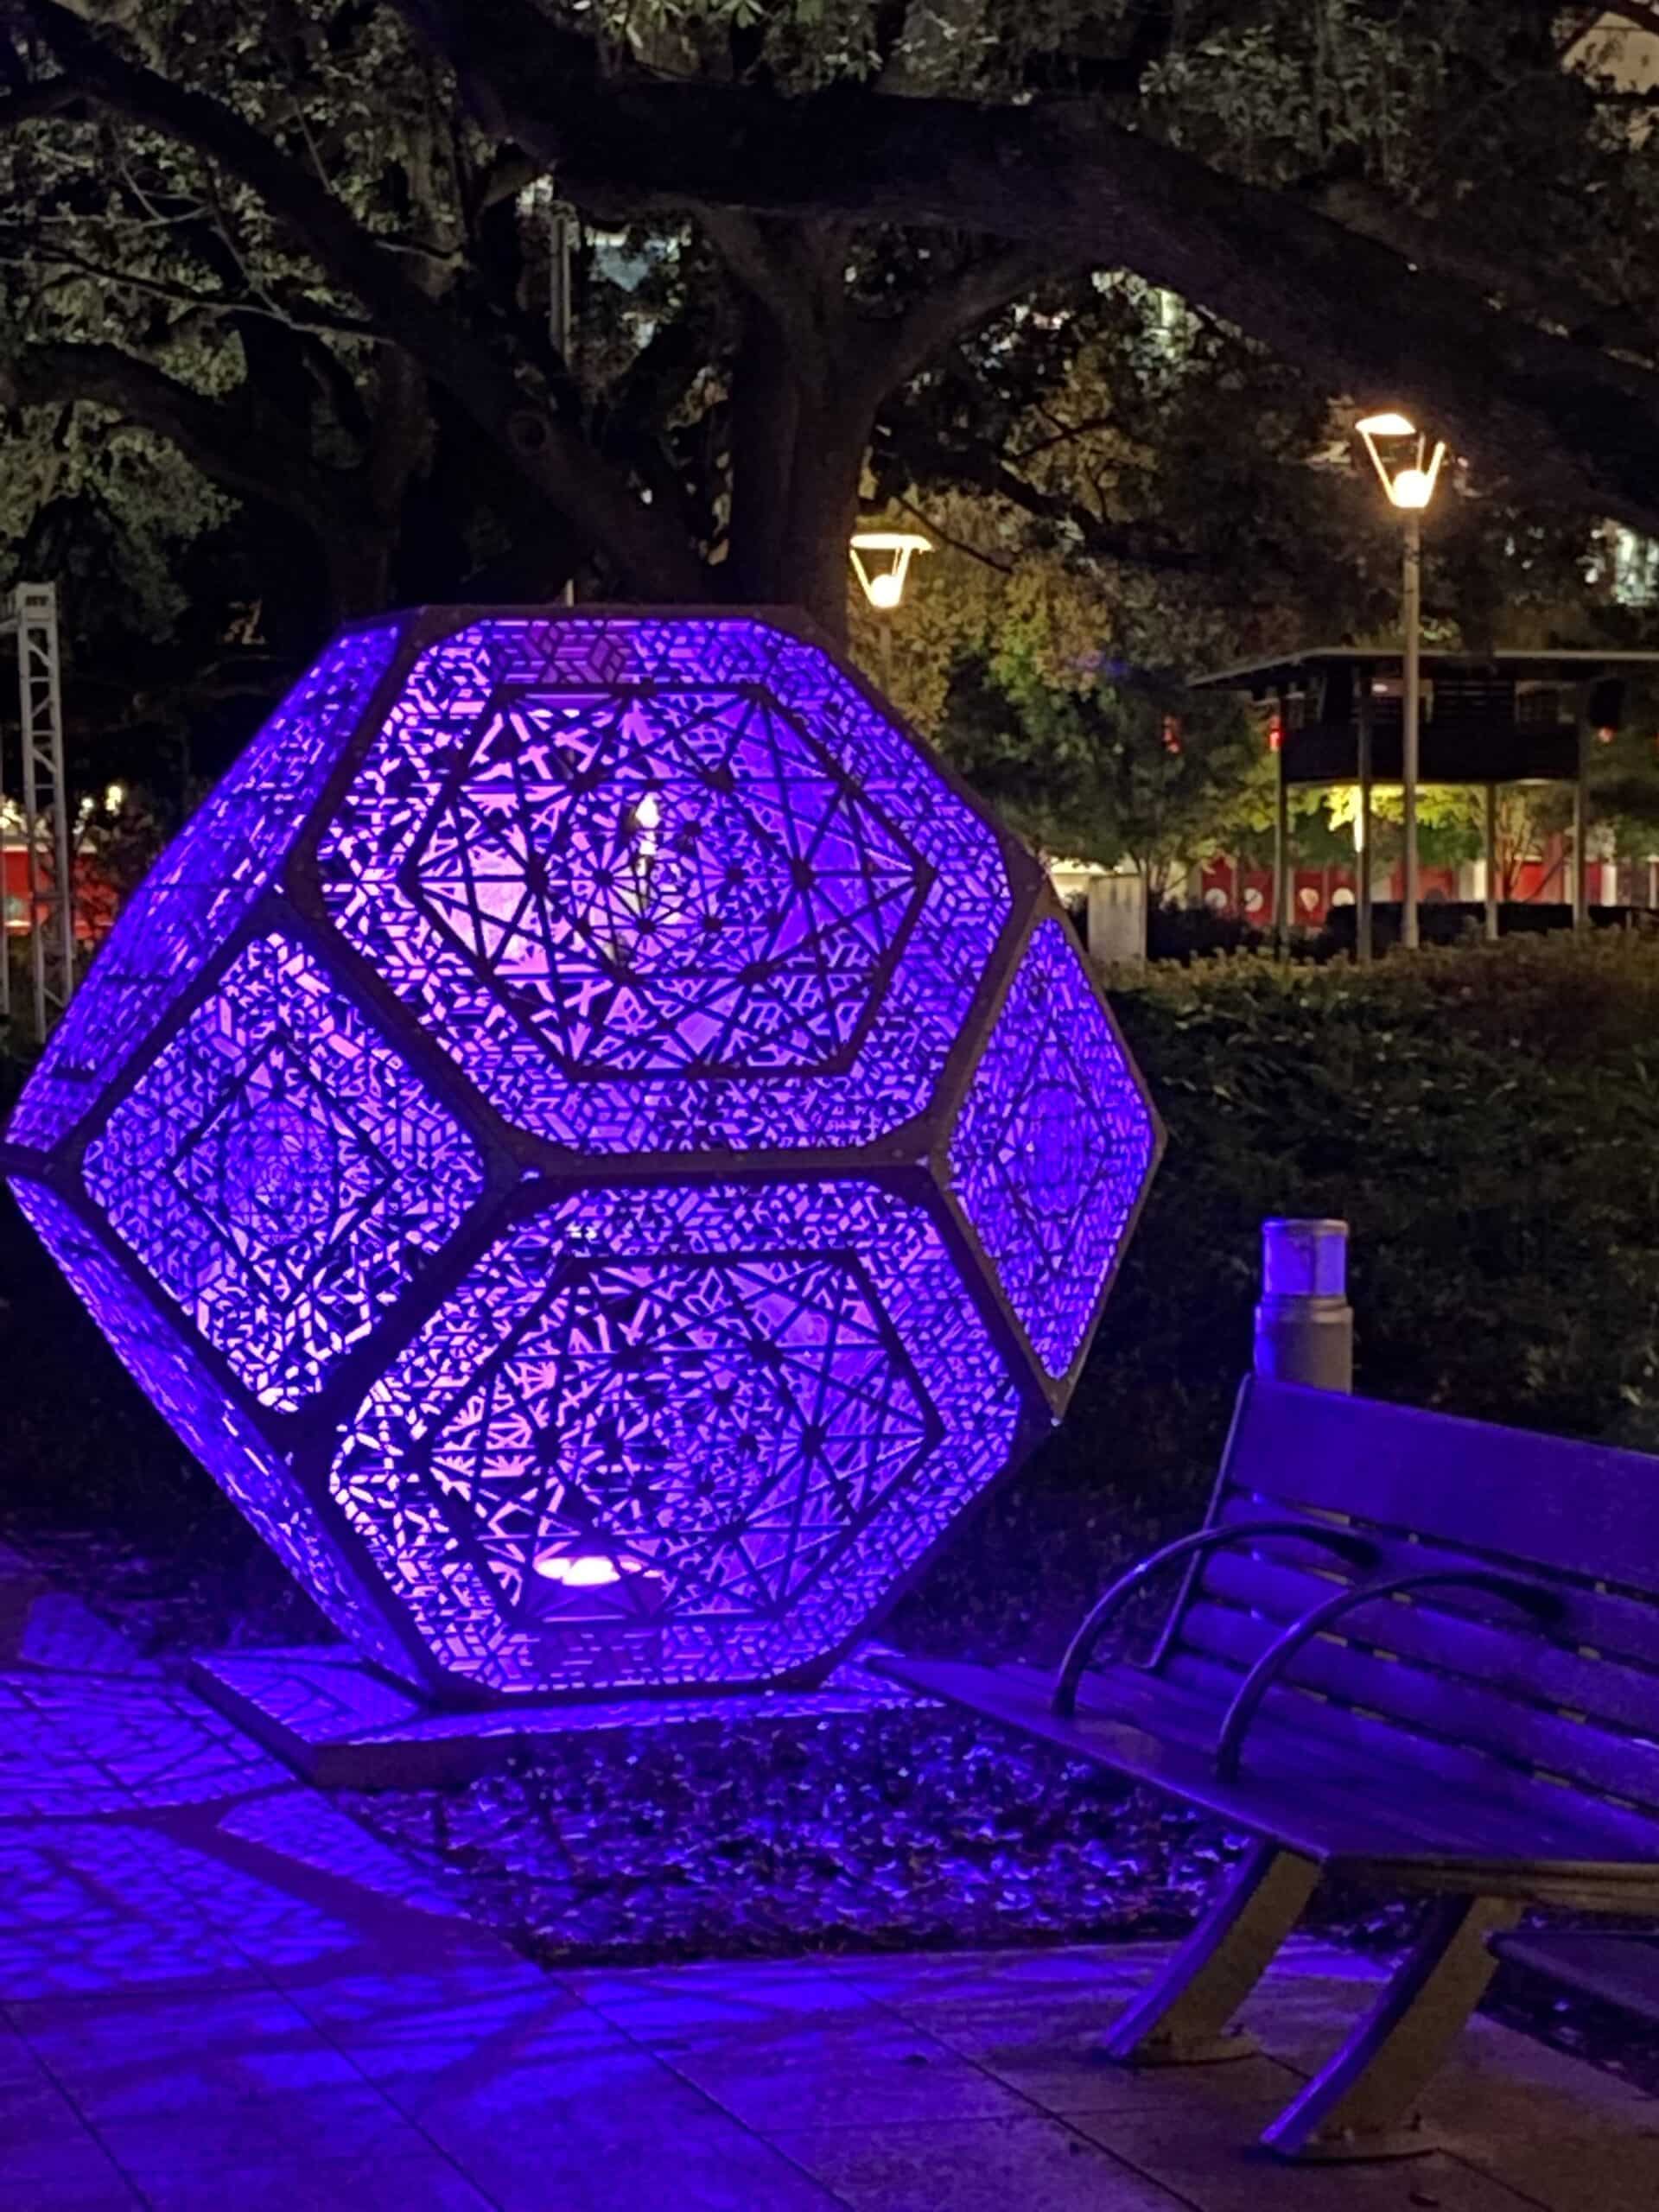 Mosaic of Light art installation at Discovery Green